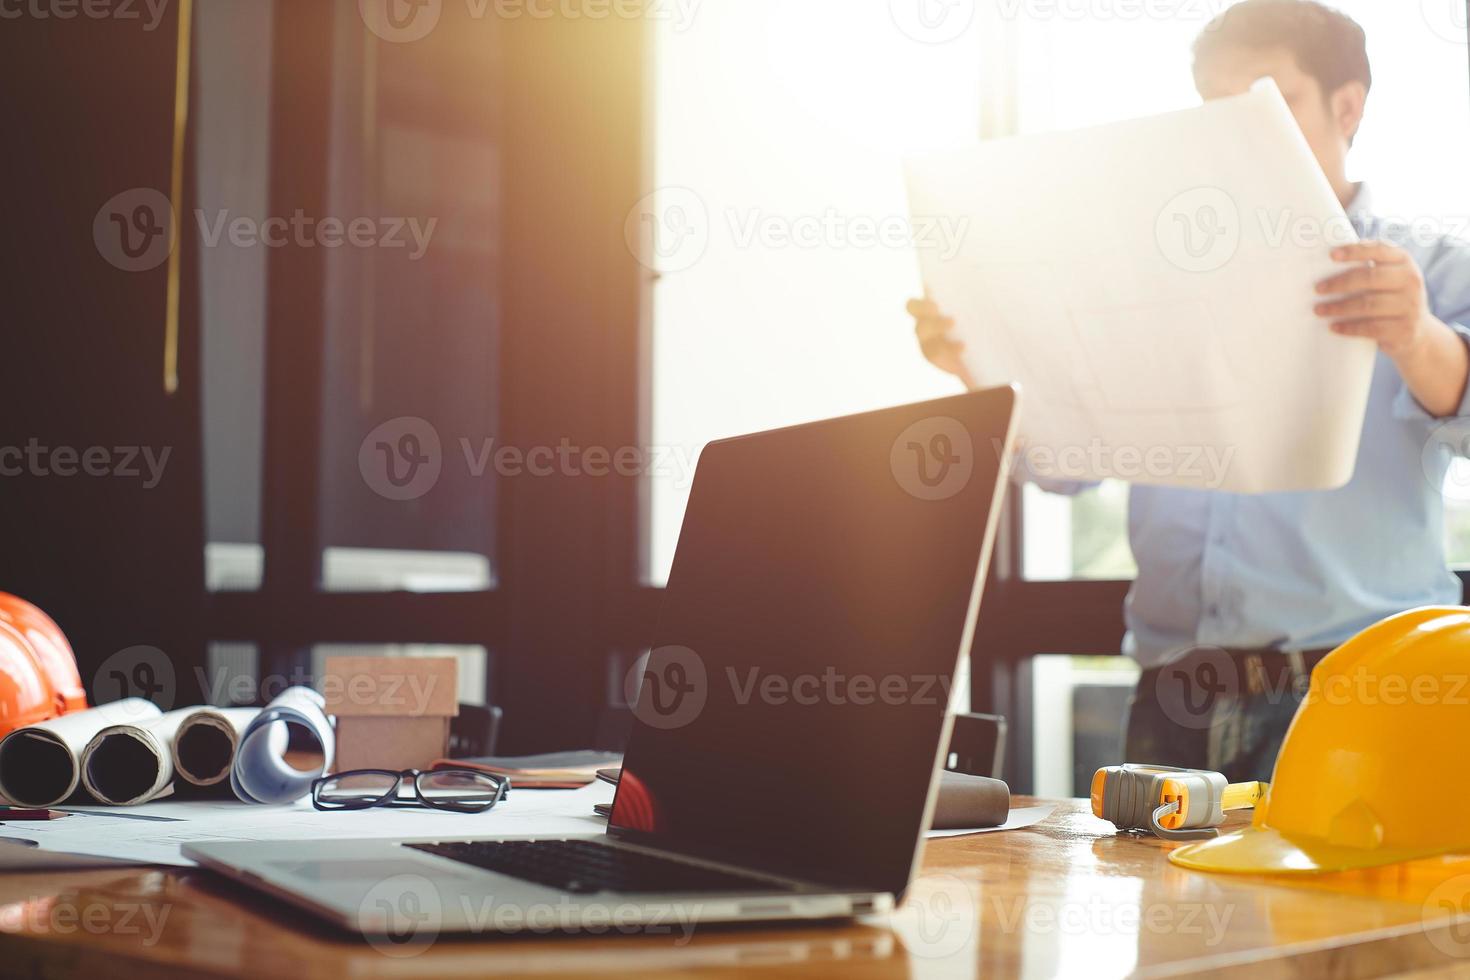 Business objects of architect on desk with engineer tools and architect analyzer working with blueprints and model house,Team meeting concept.Project ideas concept.Vintage effect,selective focus. photo